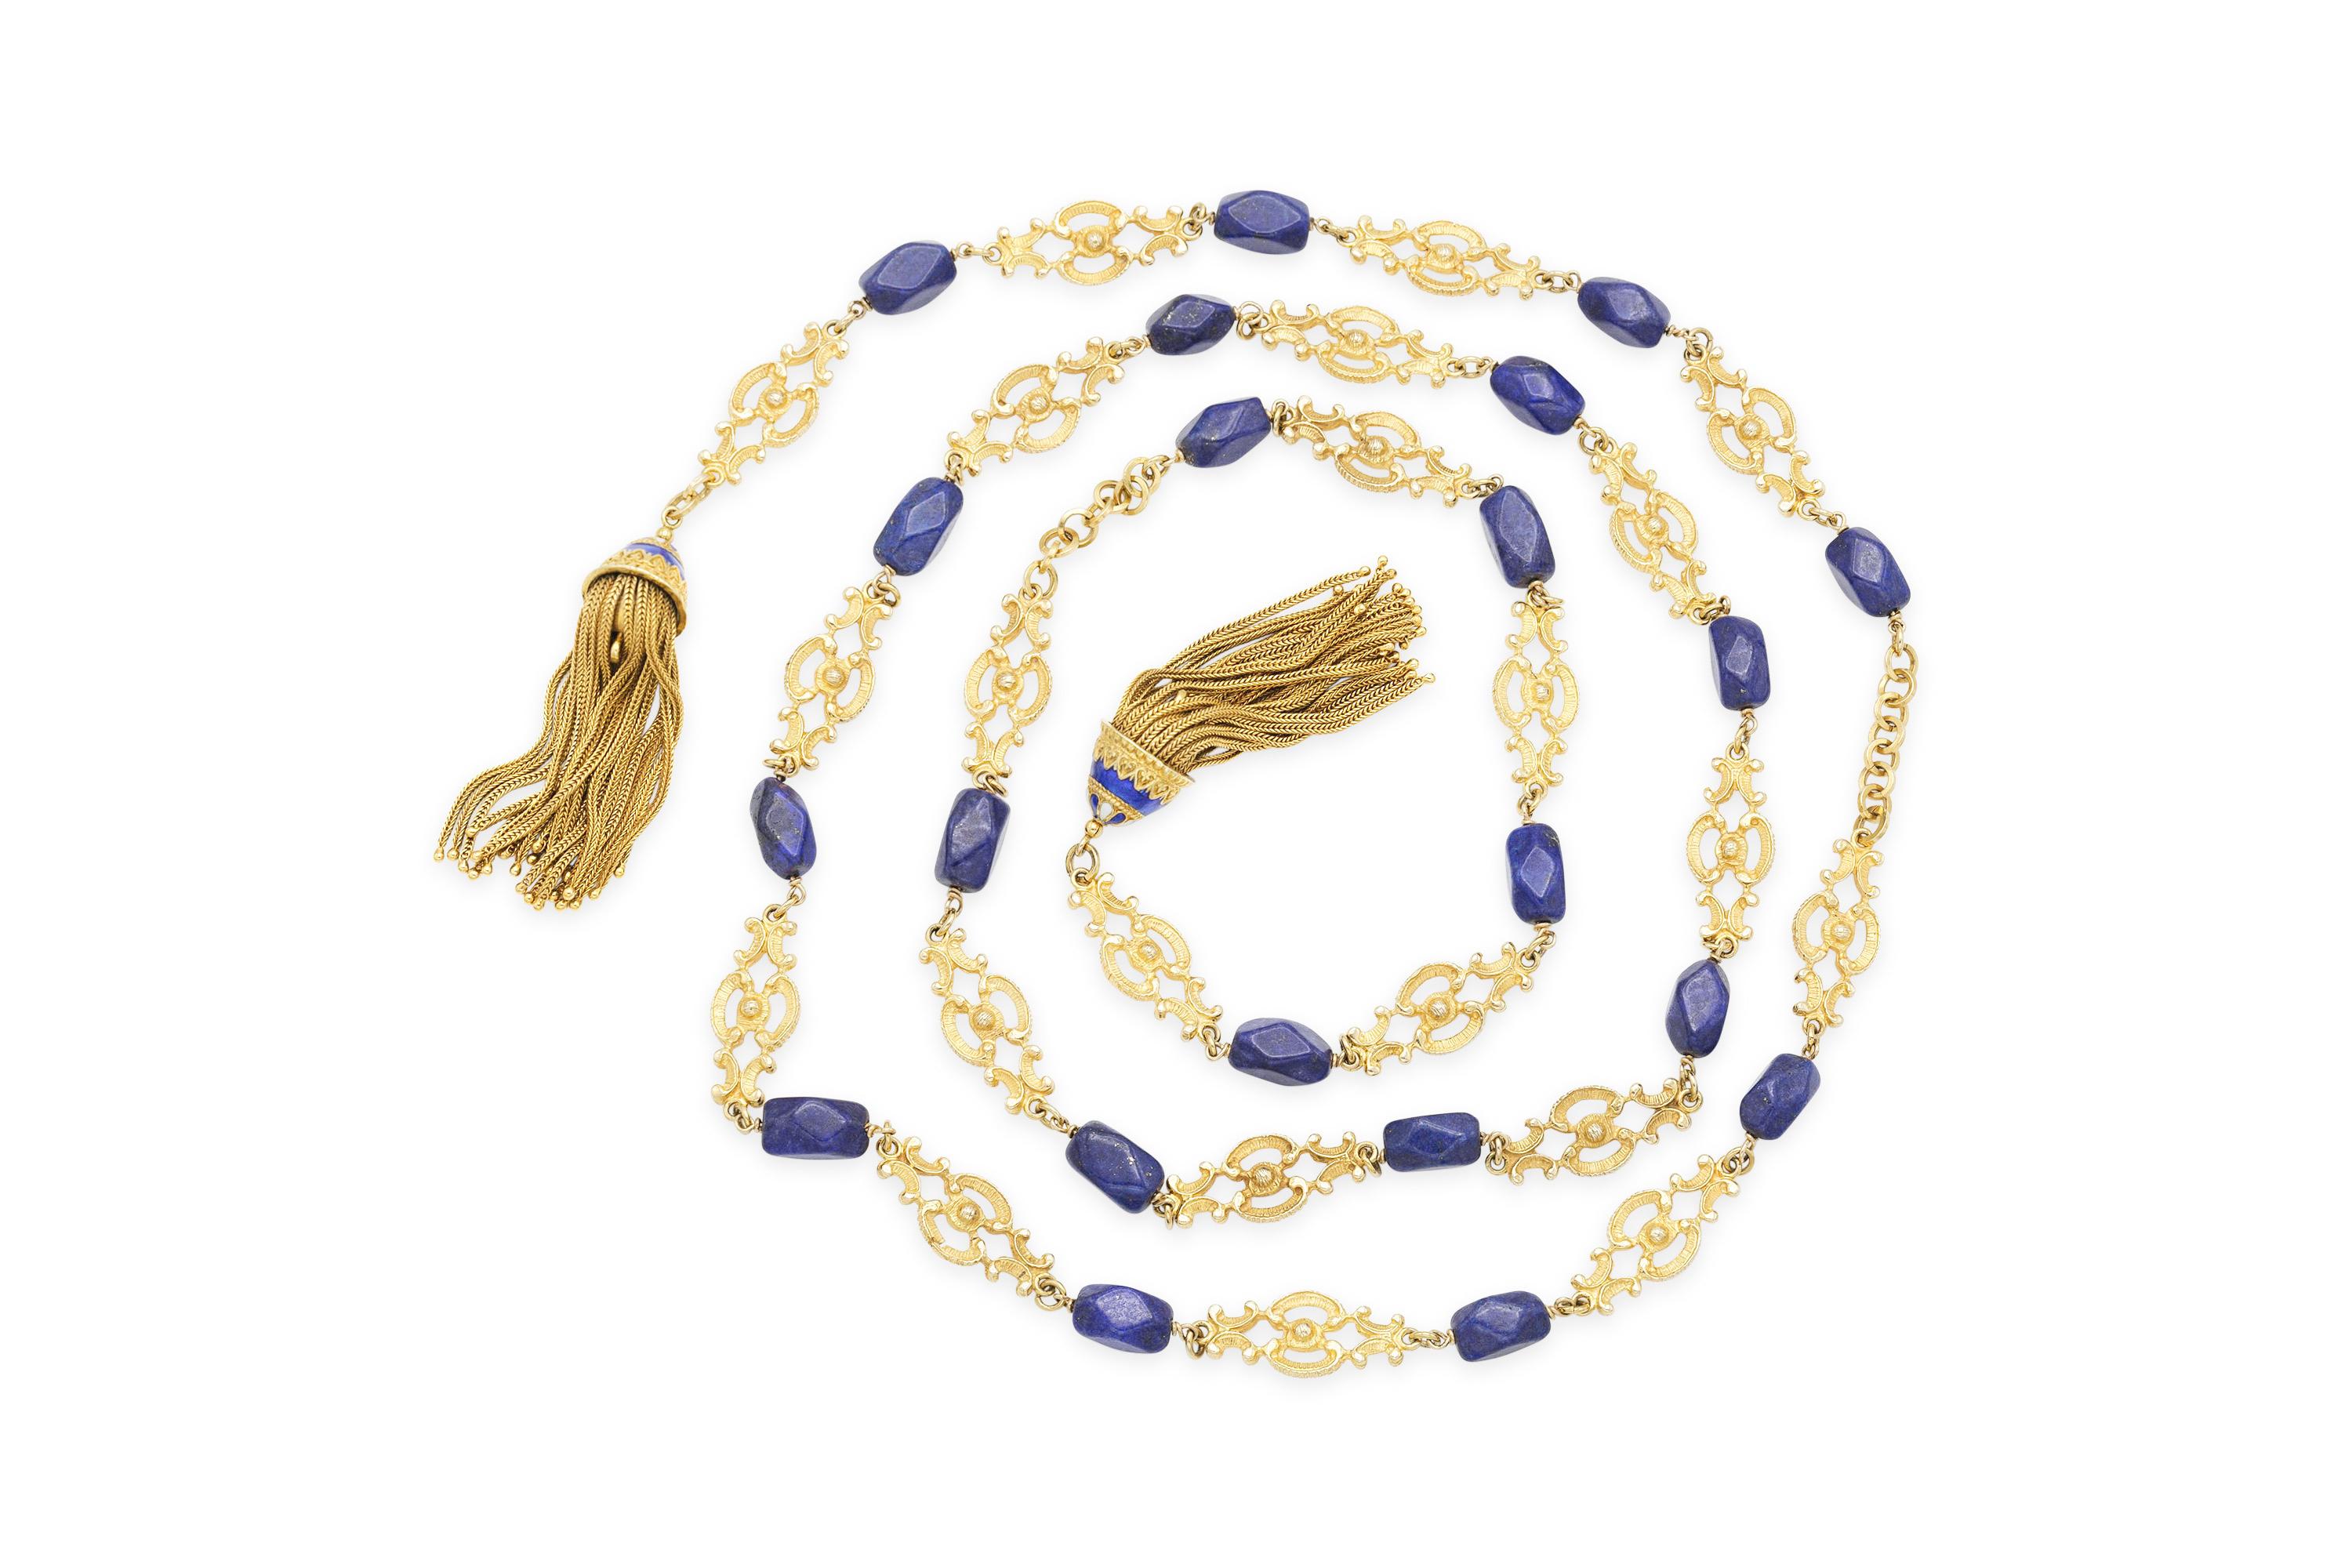 Finely crafted in 18k yellow gold with Lapis Lazuli and blue enamel.
48 inches long